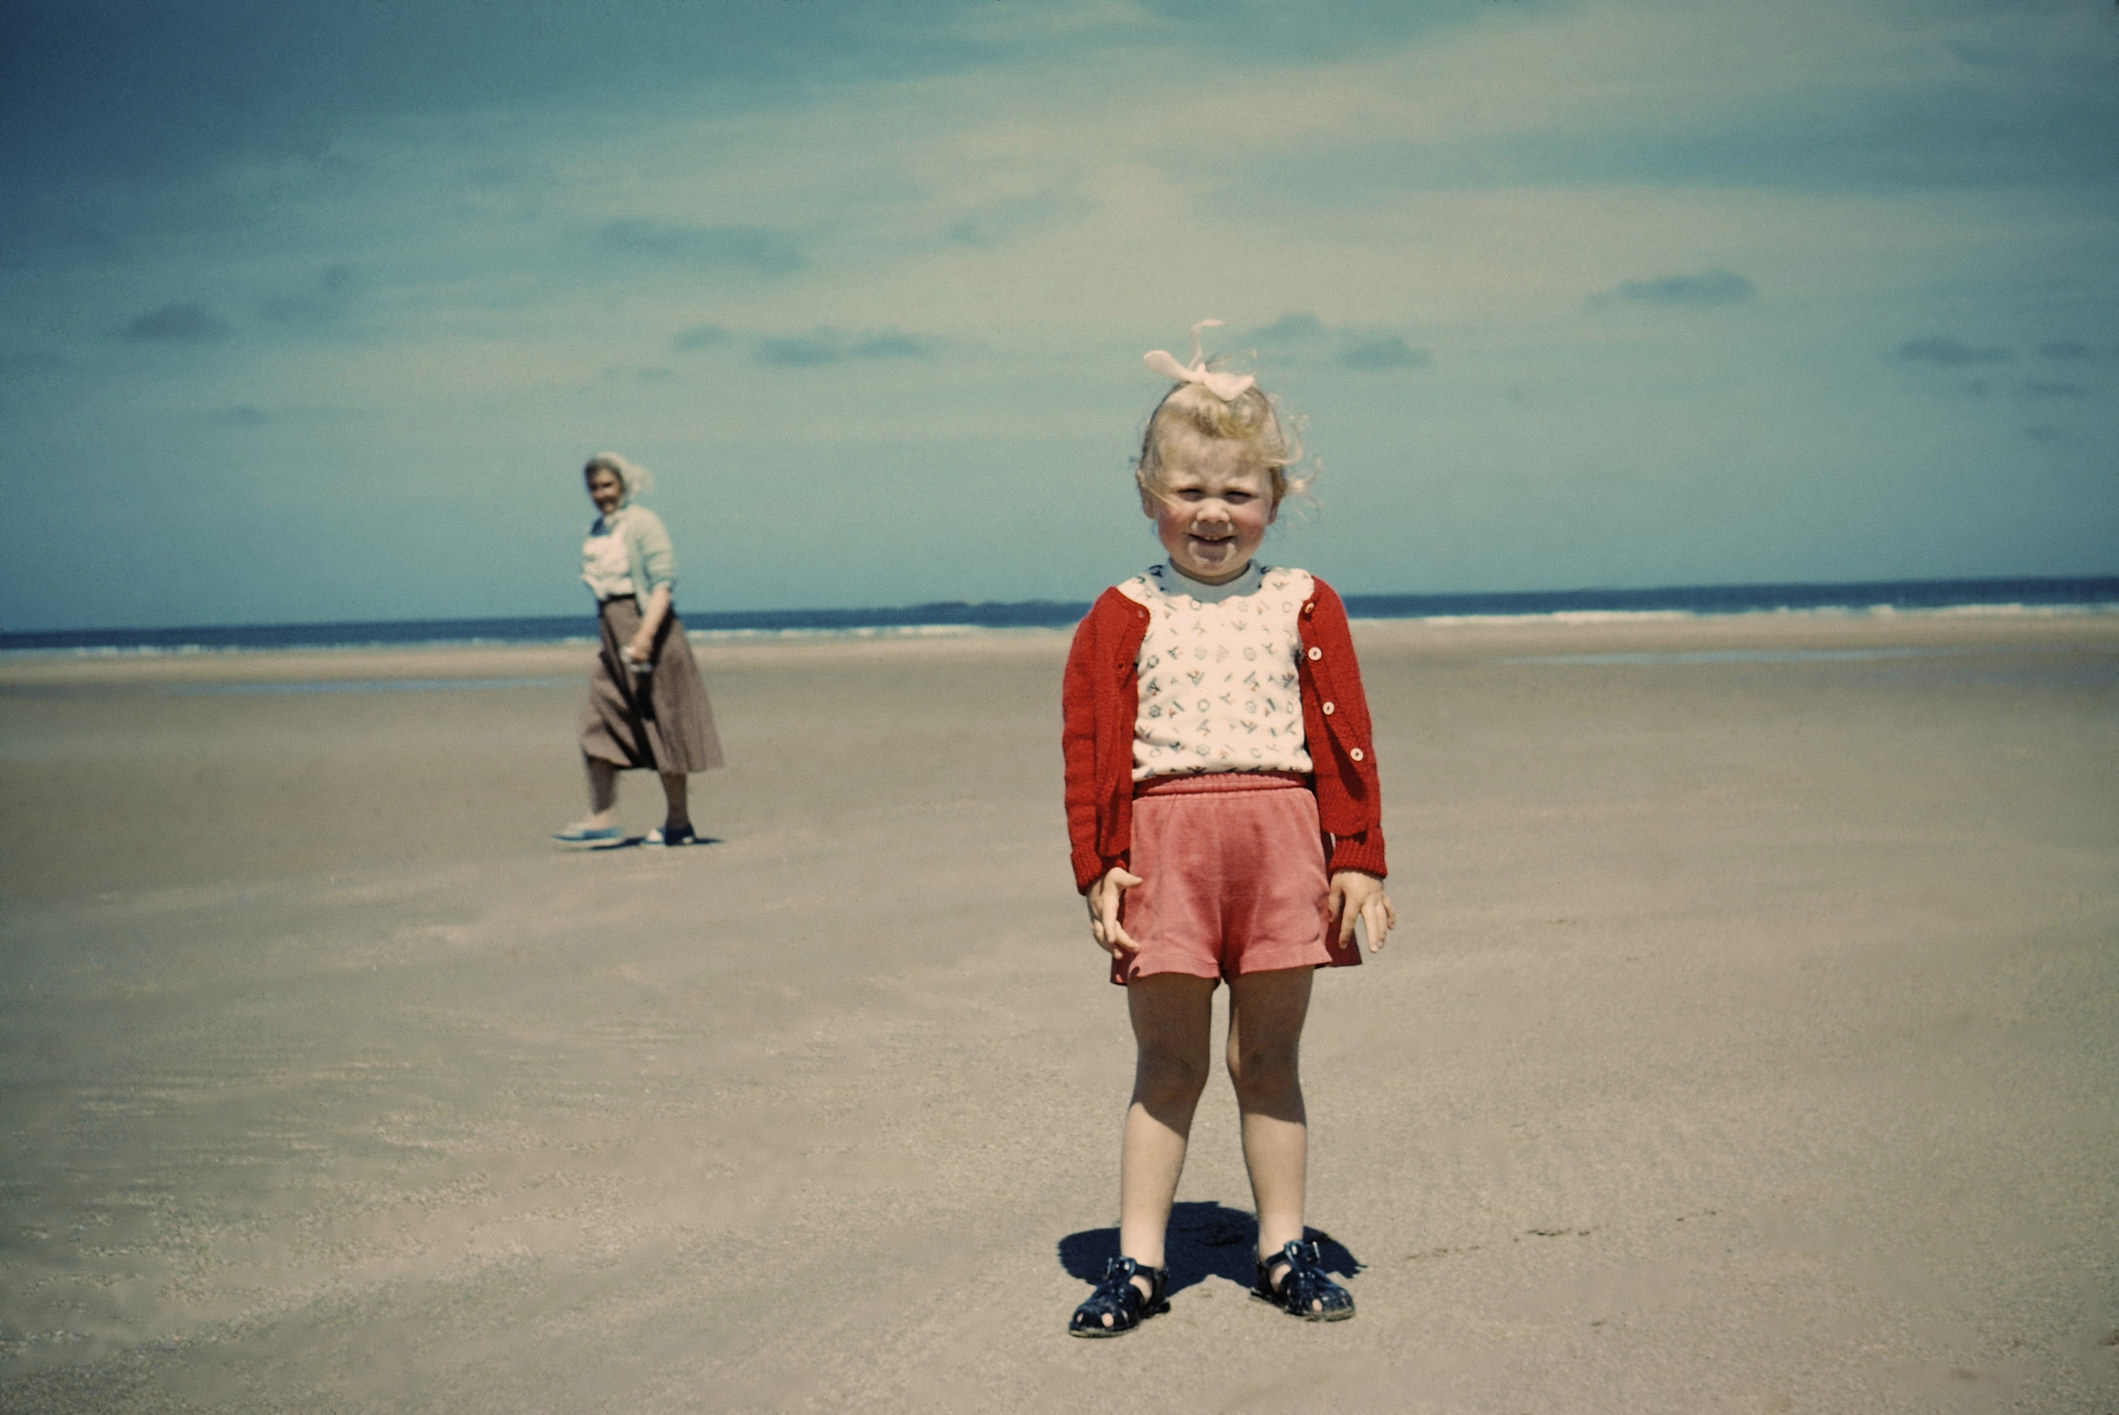 A young girl stands on the beach